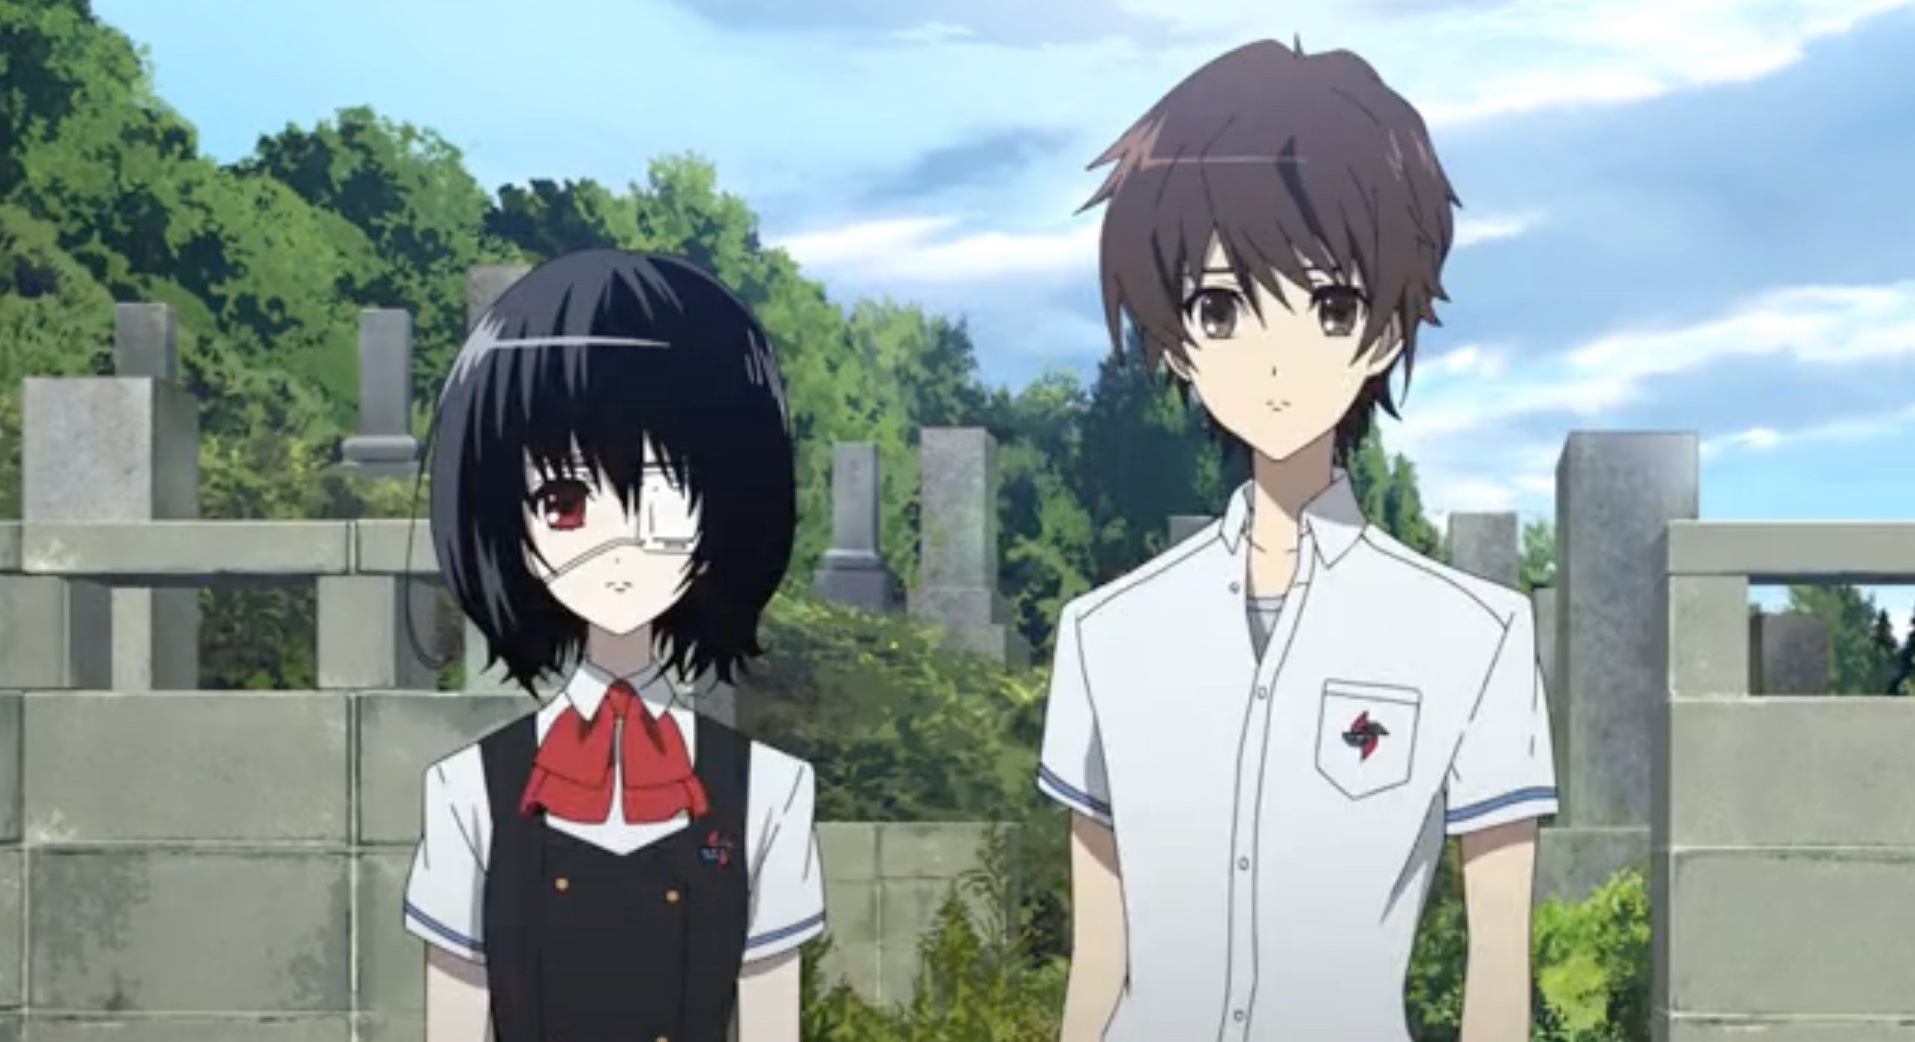 Mei and Kōichi standing side by side in Another (2012).